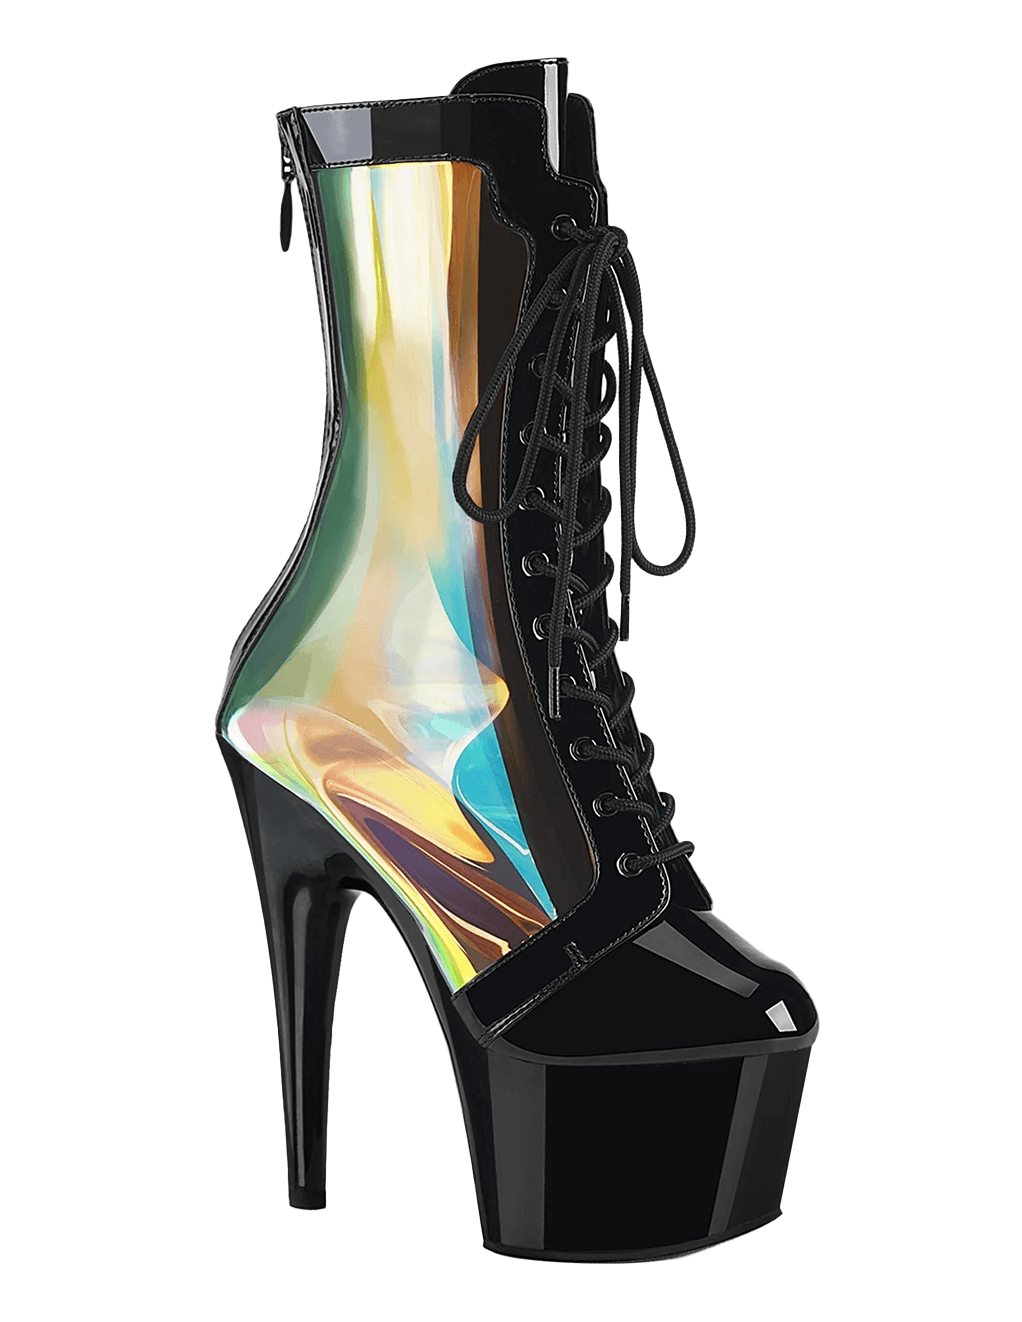 Pleaser Adore-1047 Holographic Patent Ankle Boot - Black/Holographic - Main